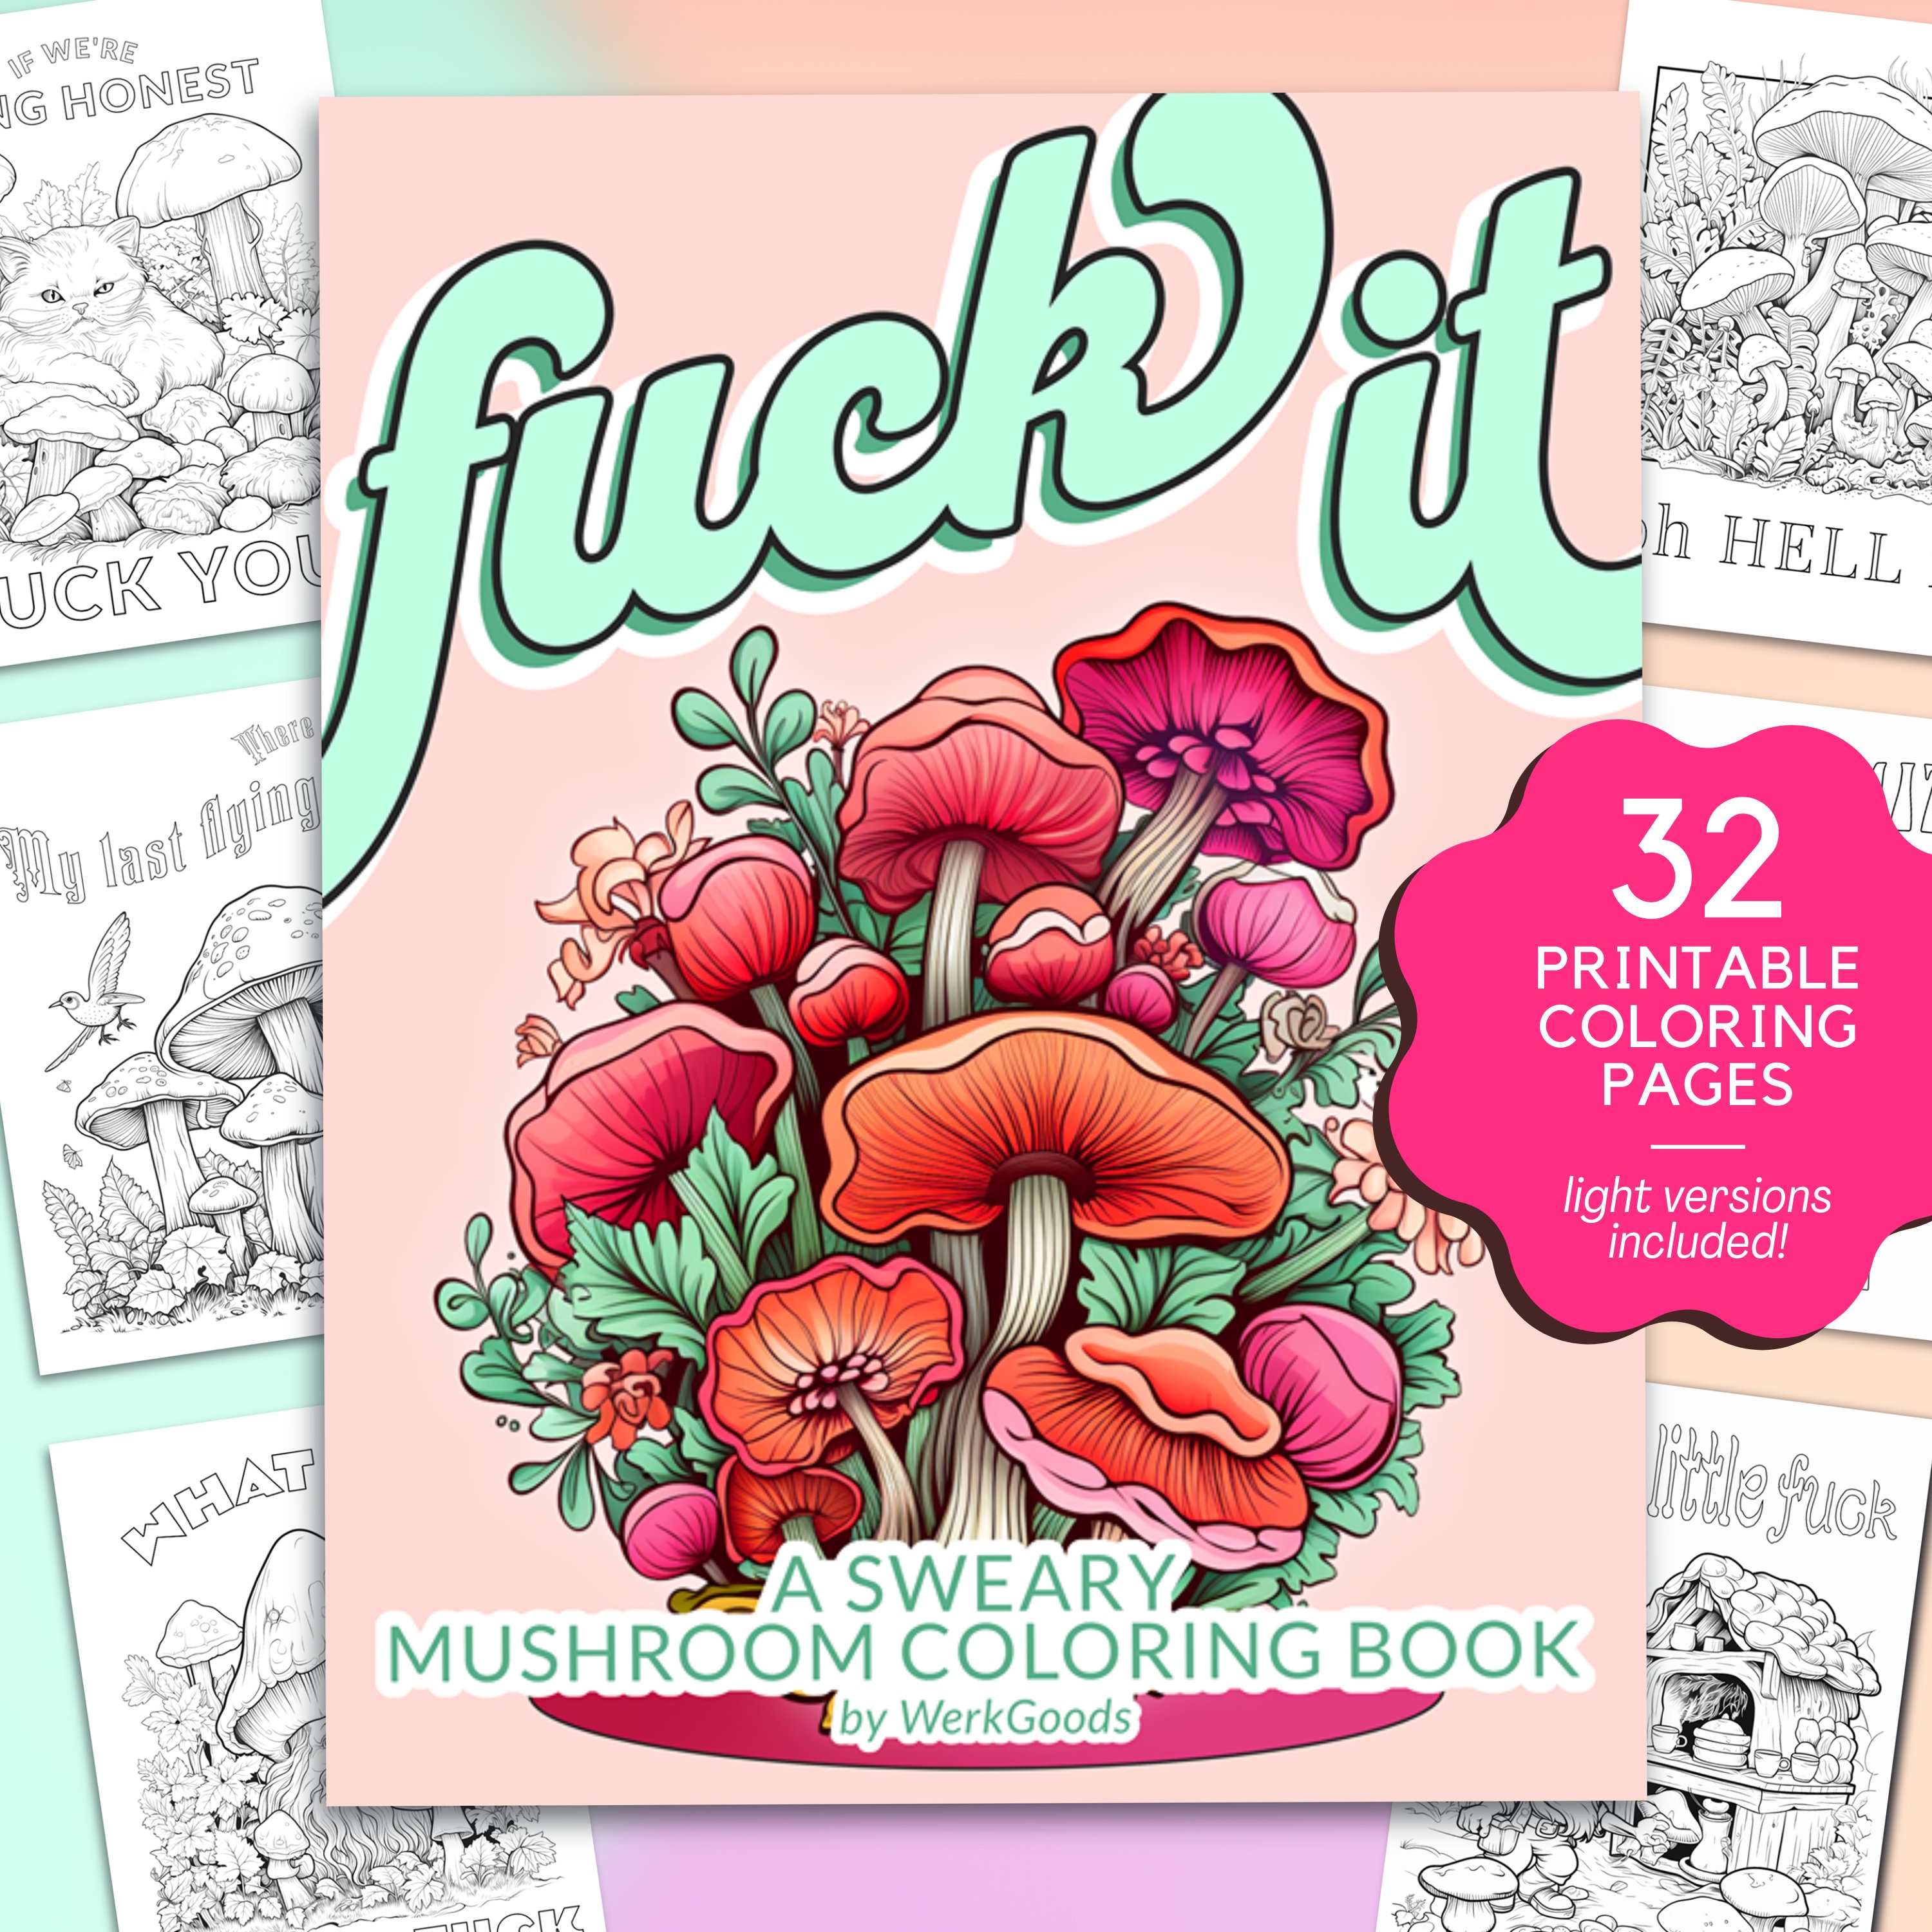 FCKITY FCK: Swear Word Colouring Book / A Motivating Swear Word Coloring  Book for Adults 